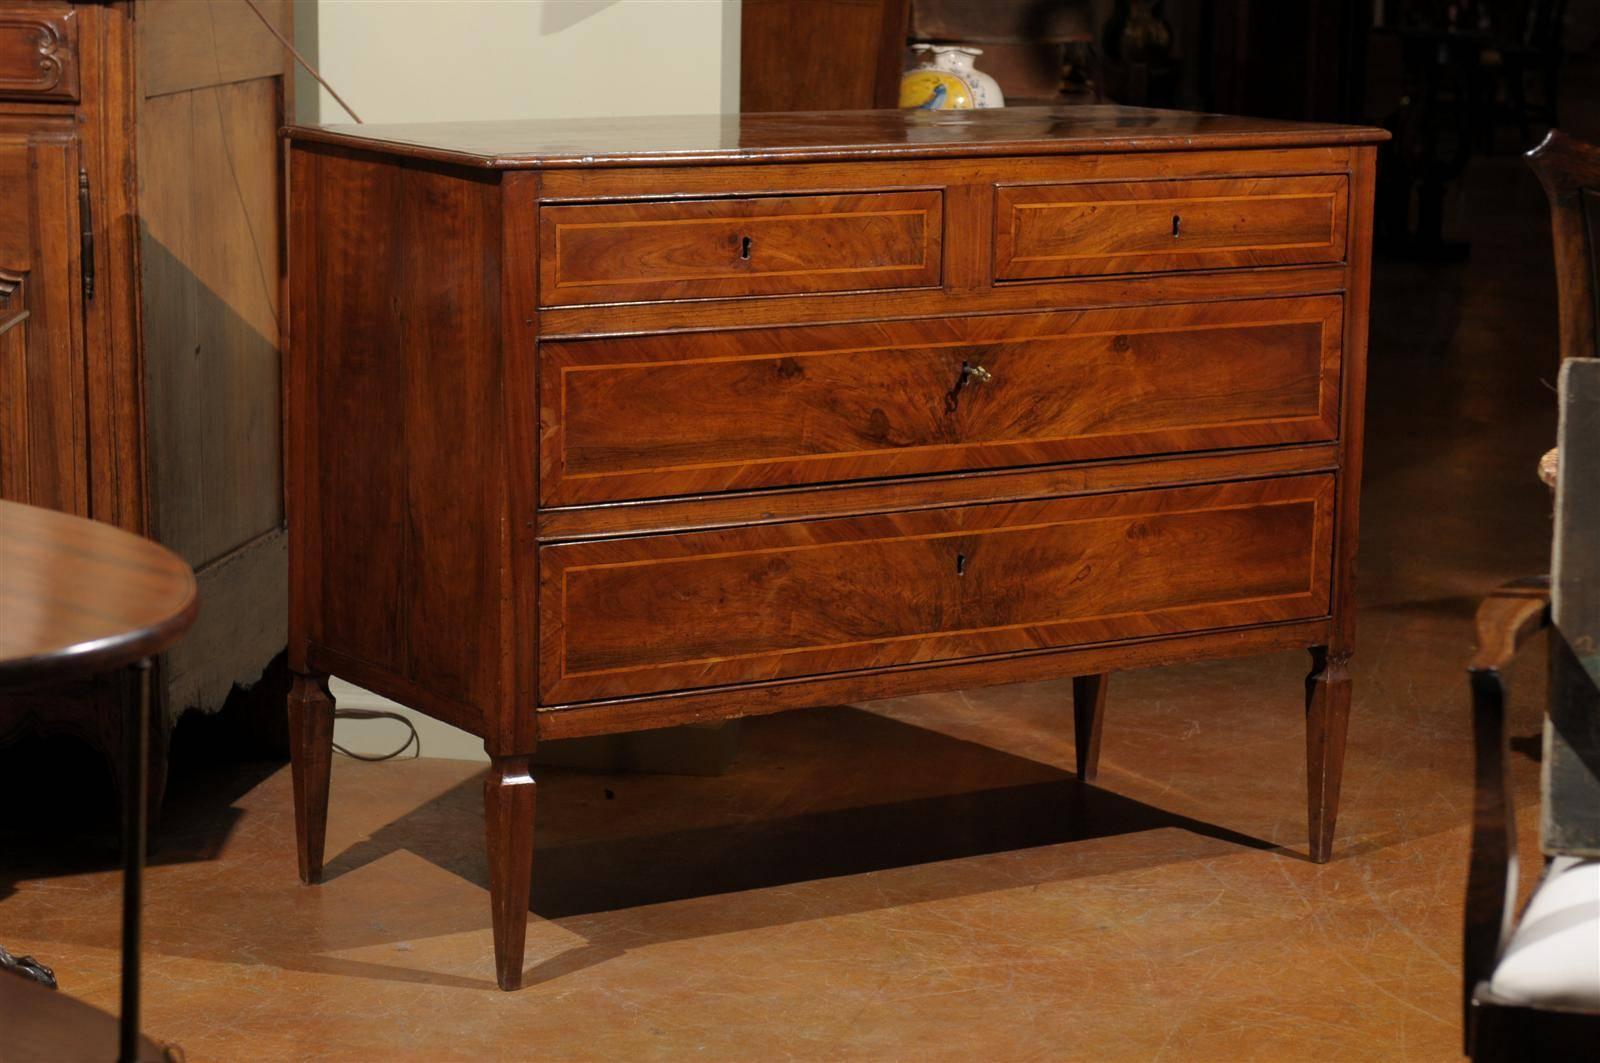 18th century Italian walnut commode, the rectangular top surmounting two inlaid short drawers above two inlaid long drawers, raised on tapering legs. Comes with working locks and keys.